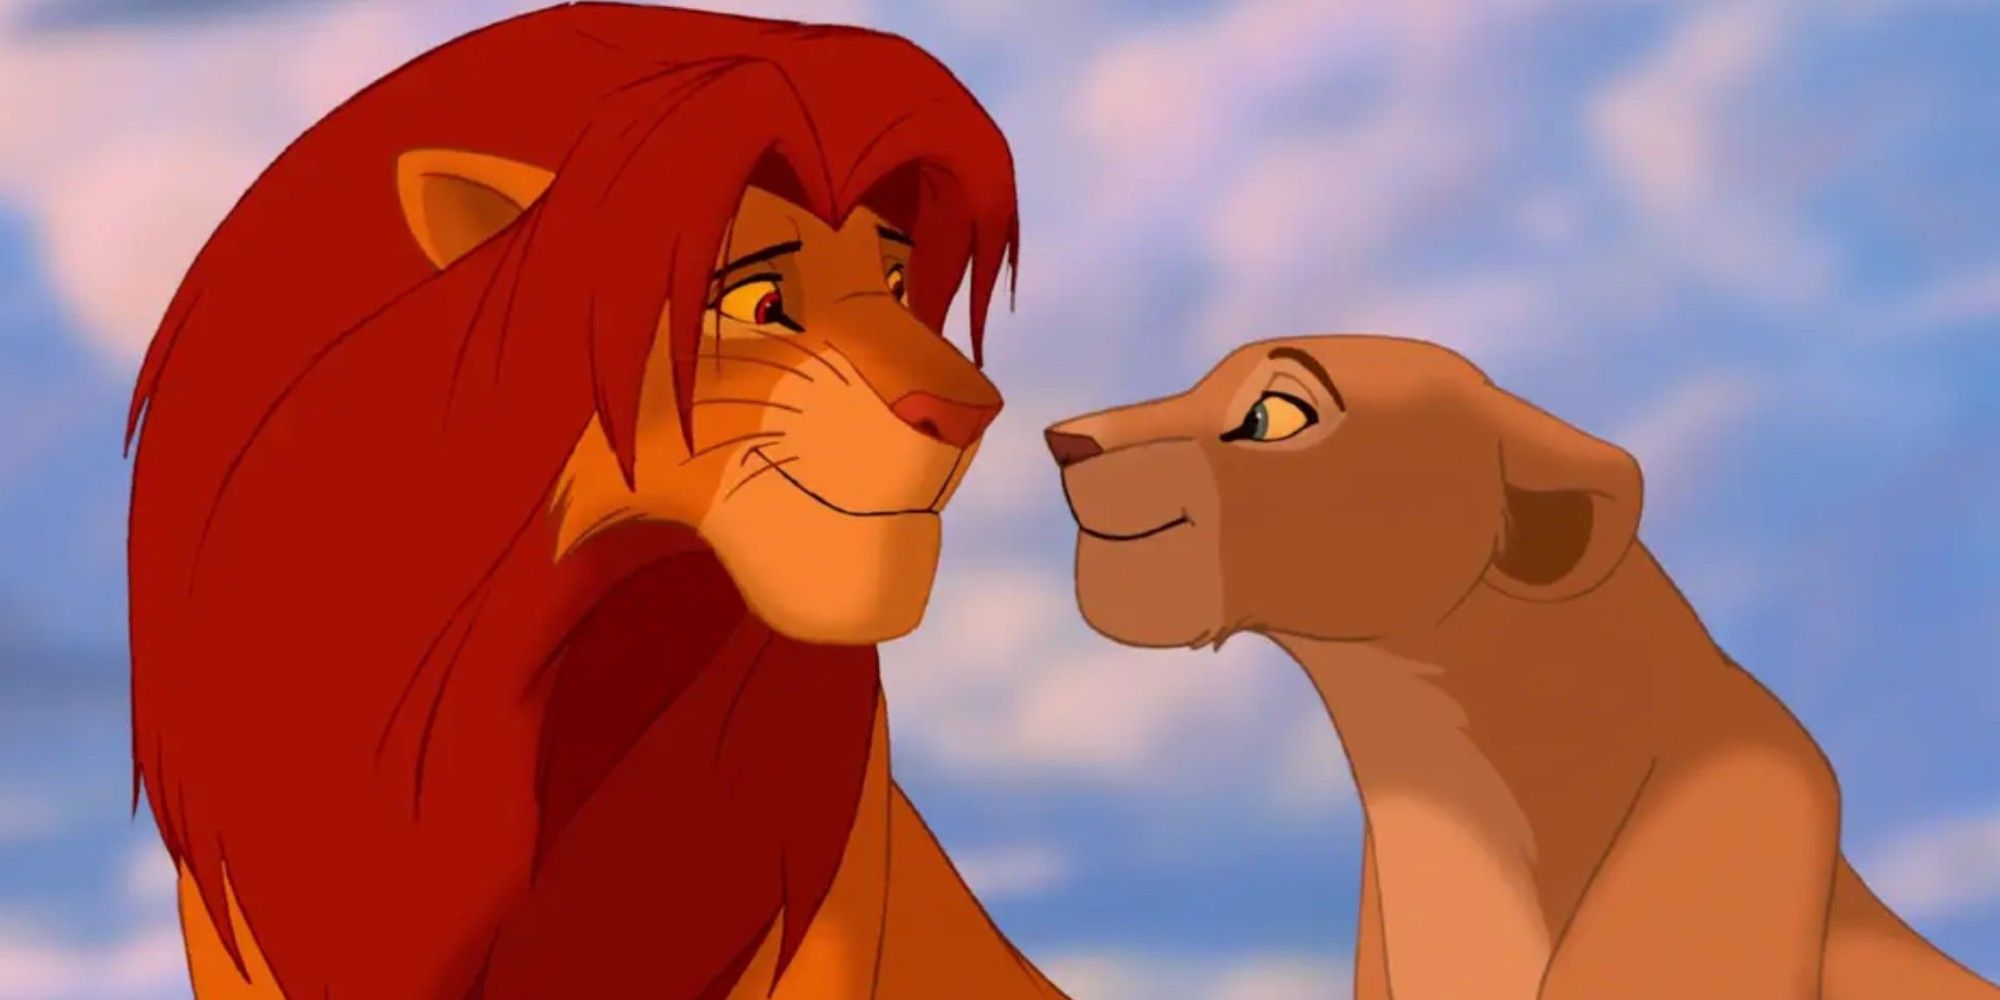 Simba and Nala looking at each other in The Lion King